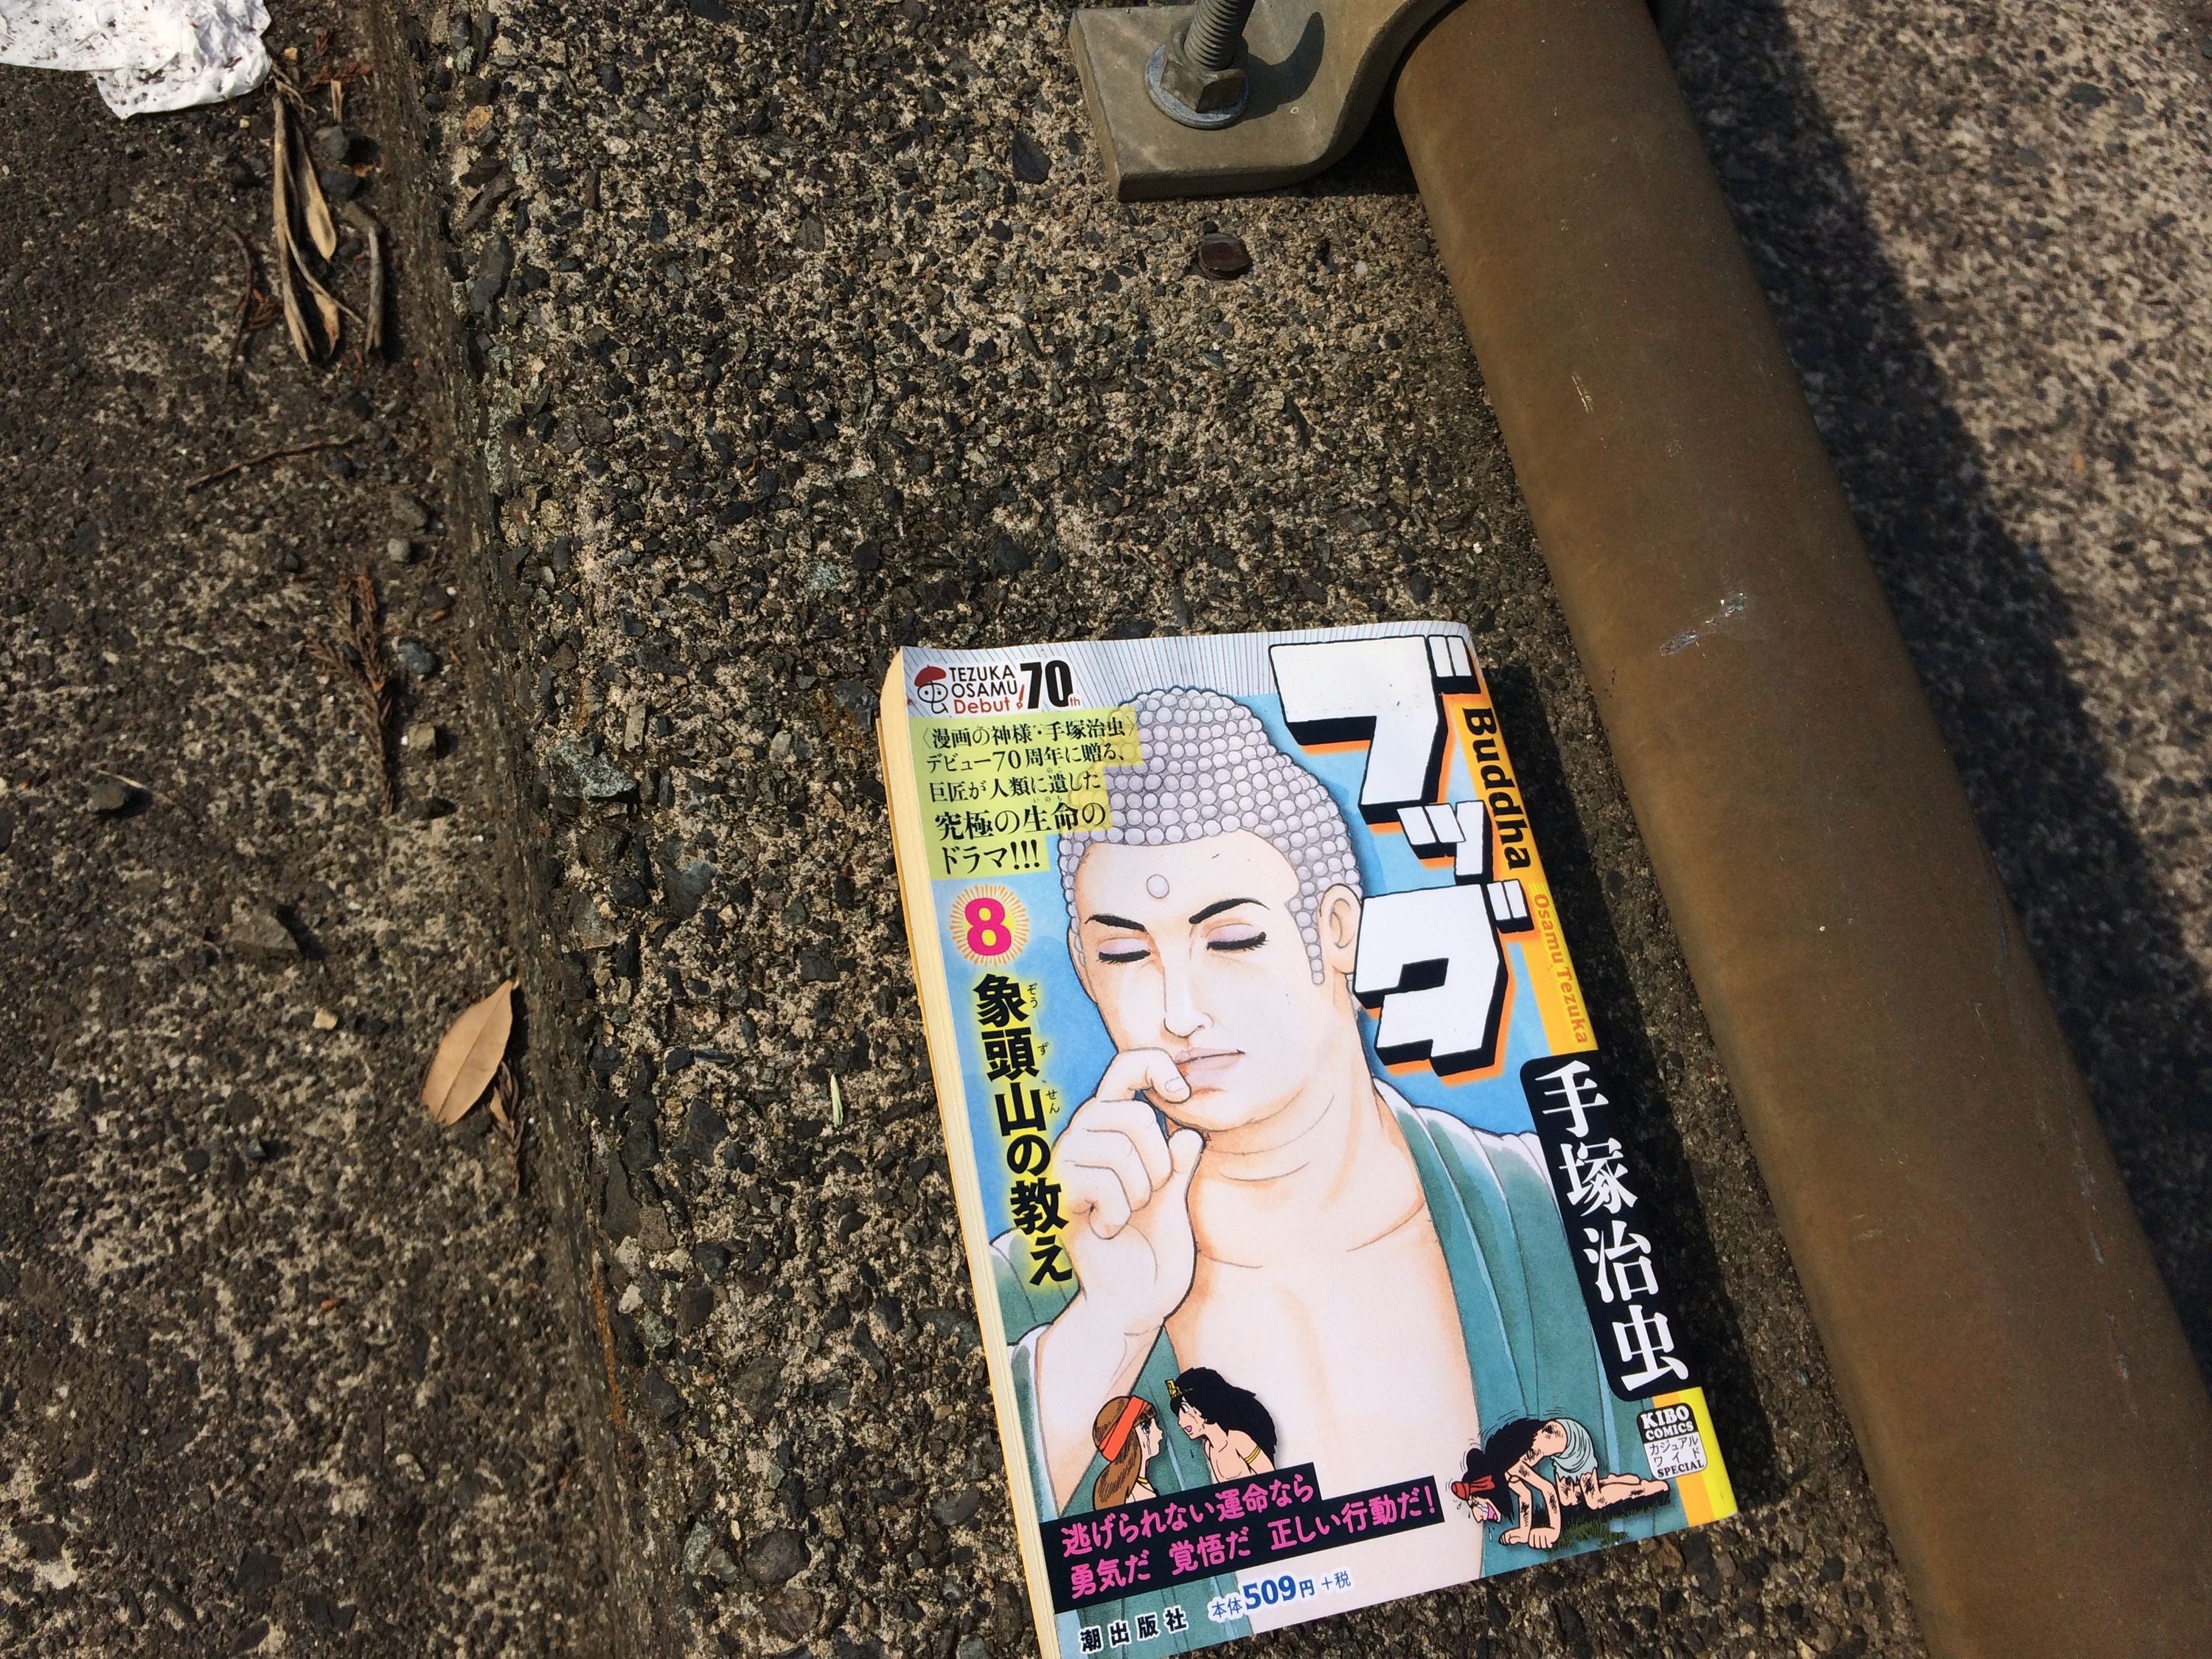 An issue of a manga comic lies on the ground, it is about a contemporary representation of the Buddha.